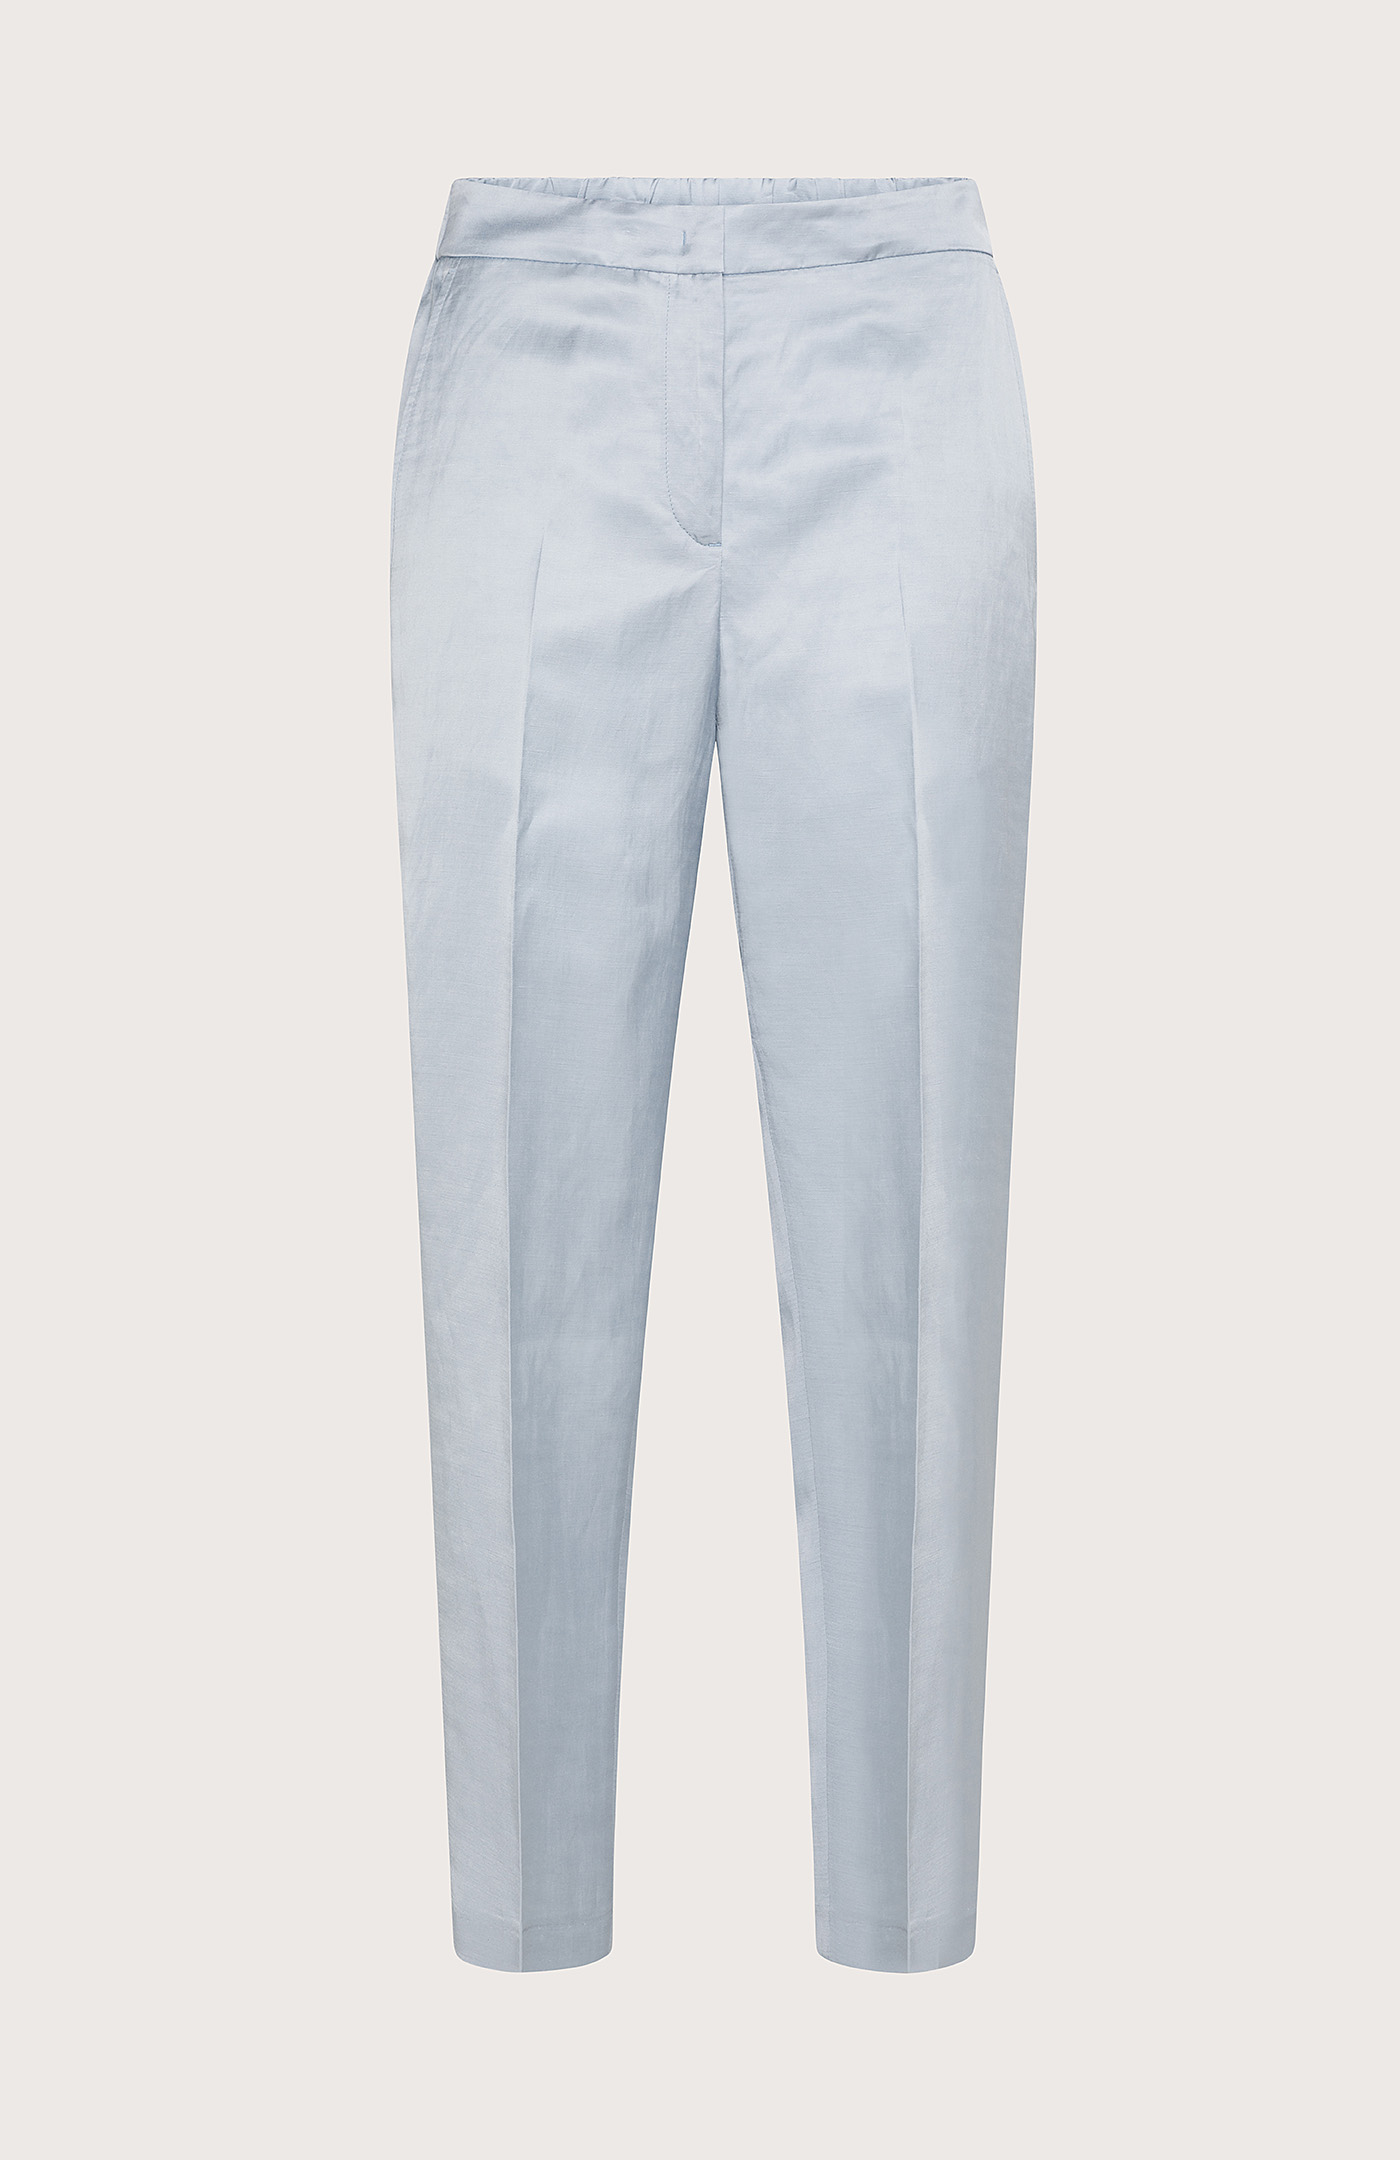 Women's Trousers and Jeans | Weekend Max Mara